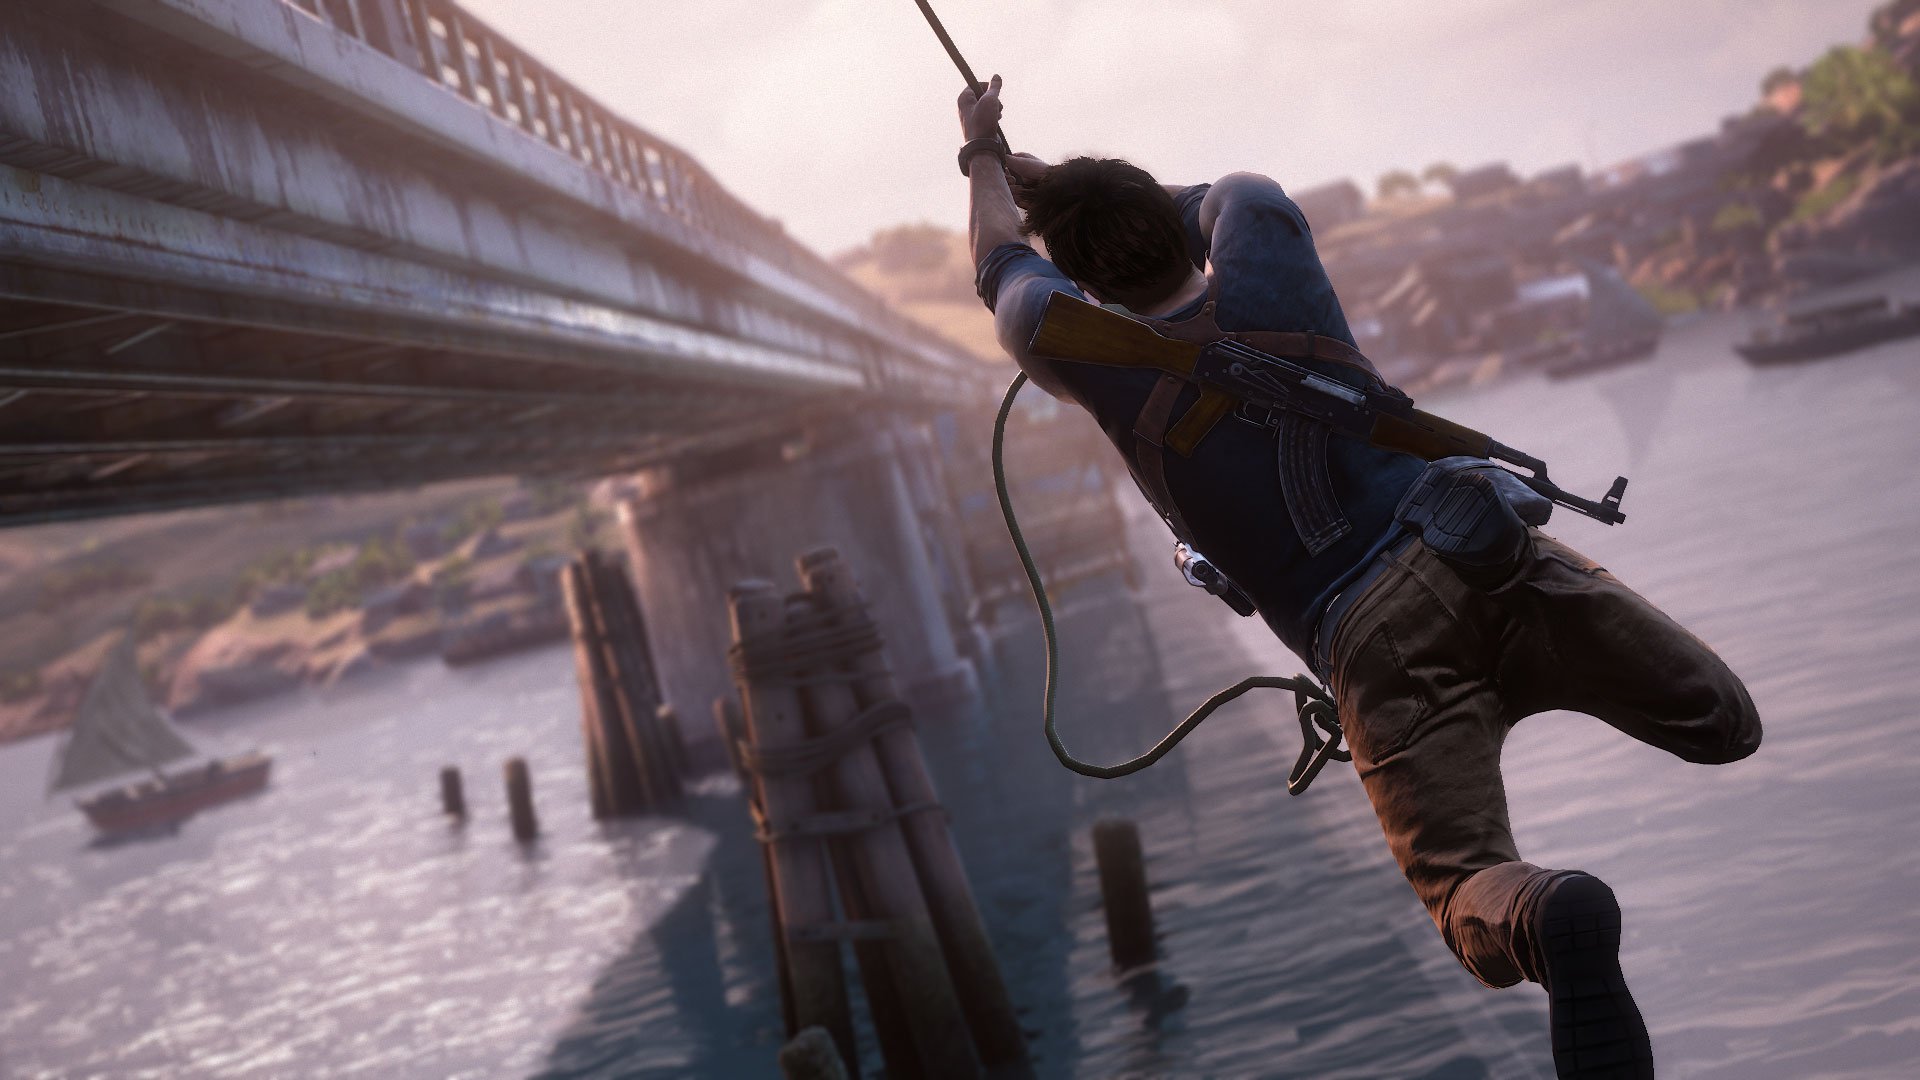 Uncharted 4: A Thief's End review: The last pillage - CNET